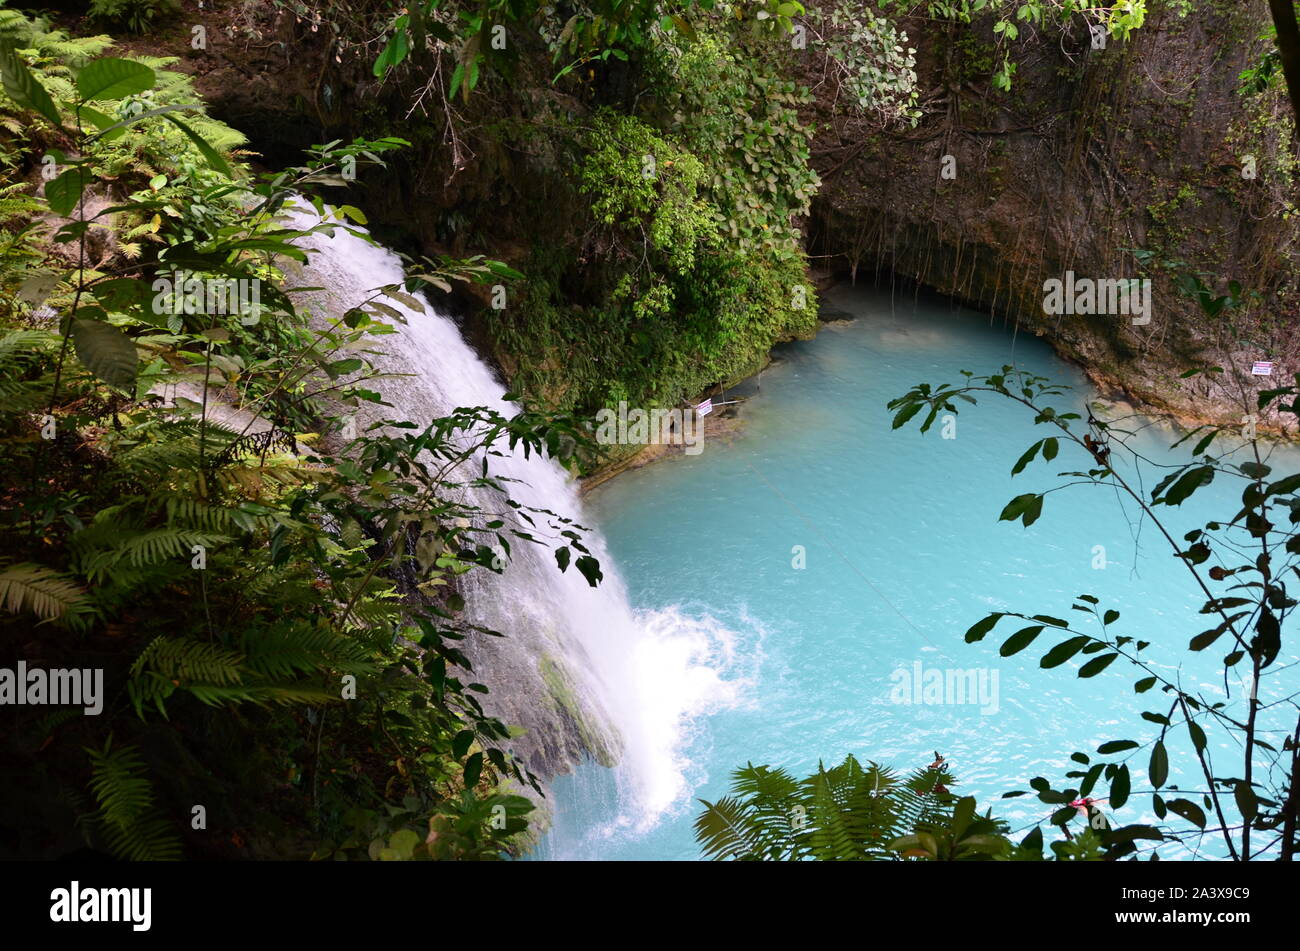 The view of the jungle and waterfall Stock Photo